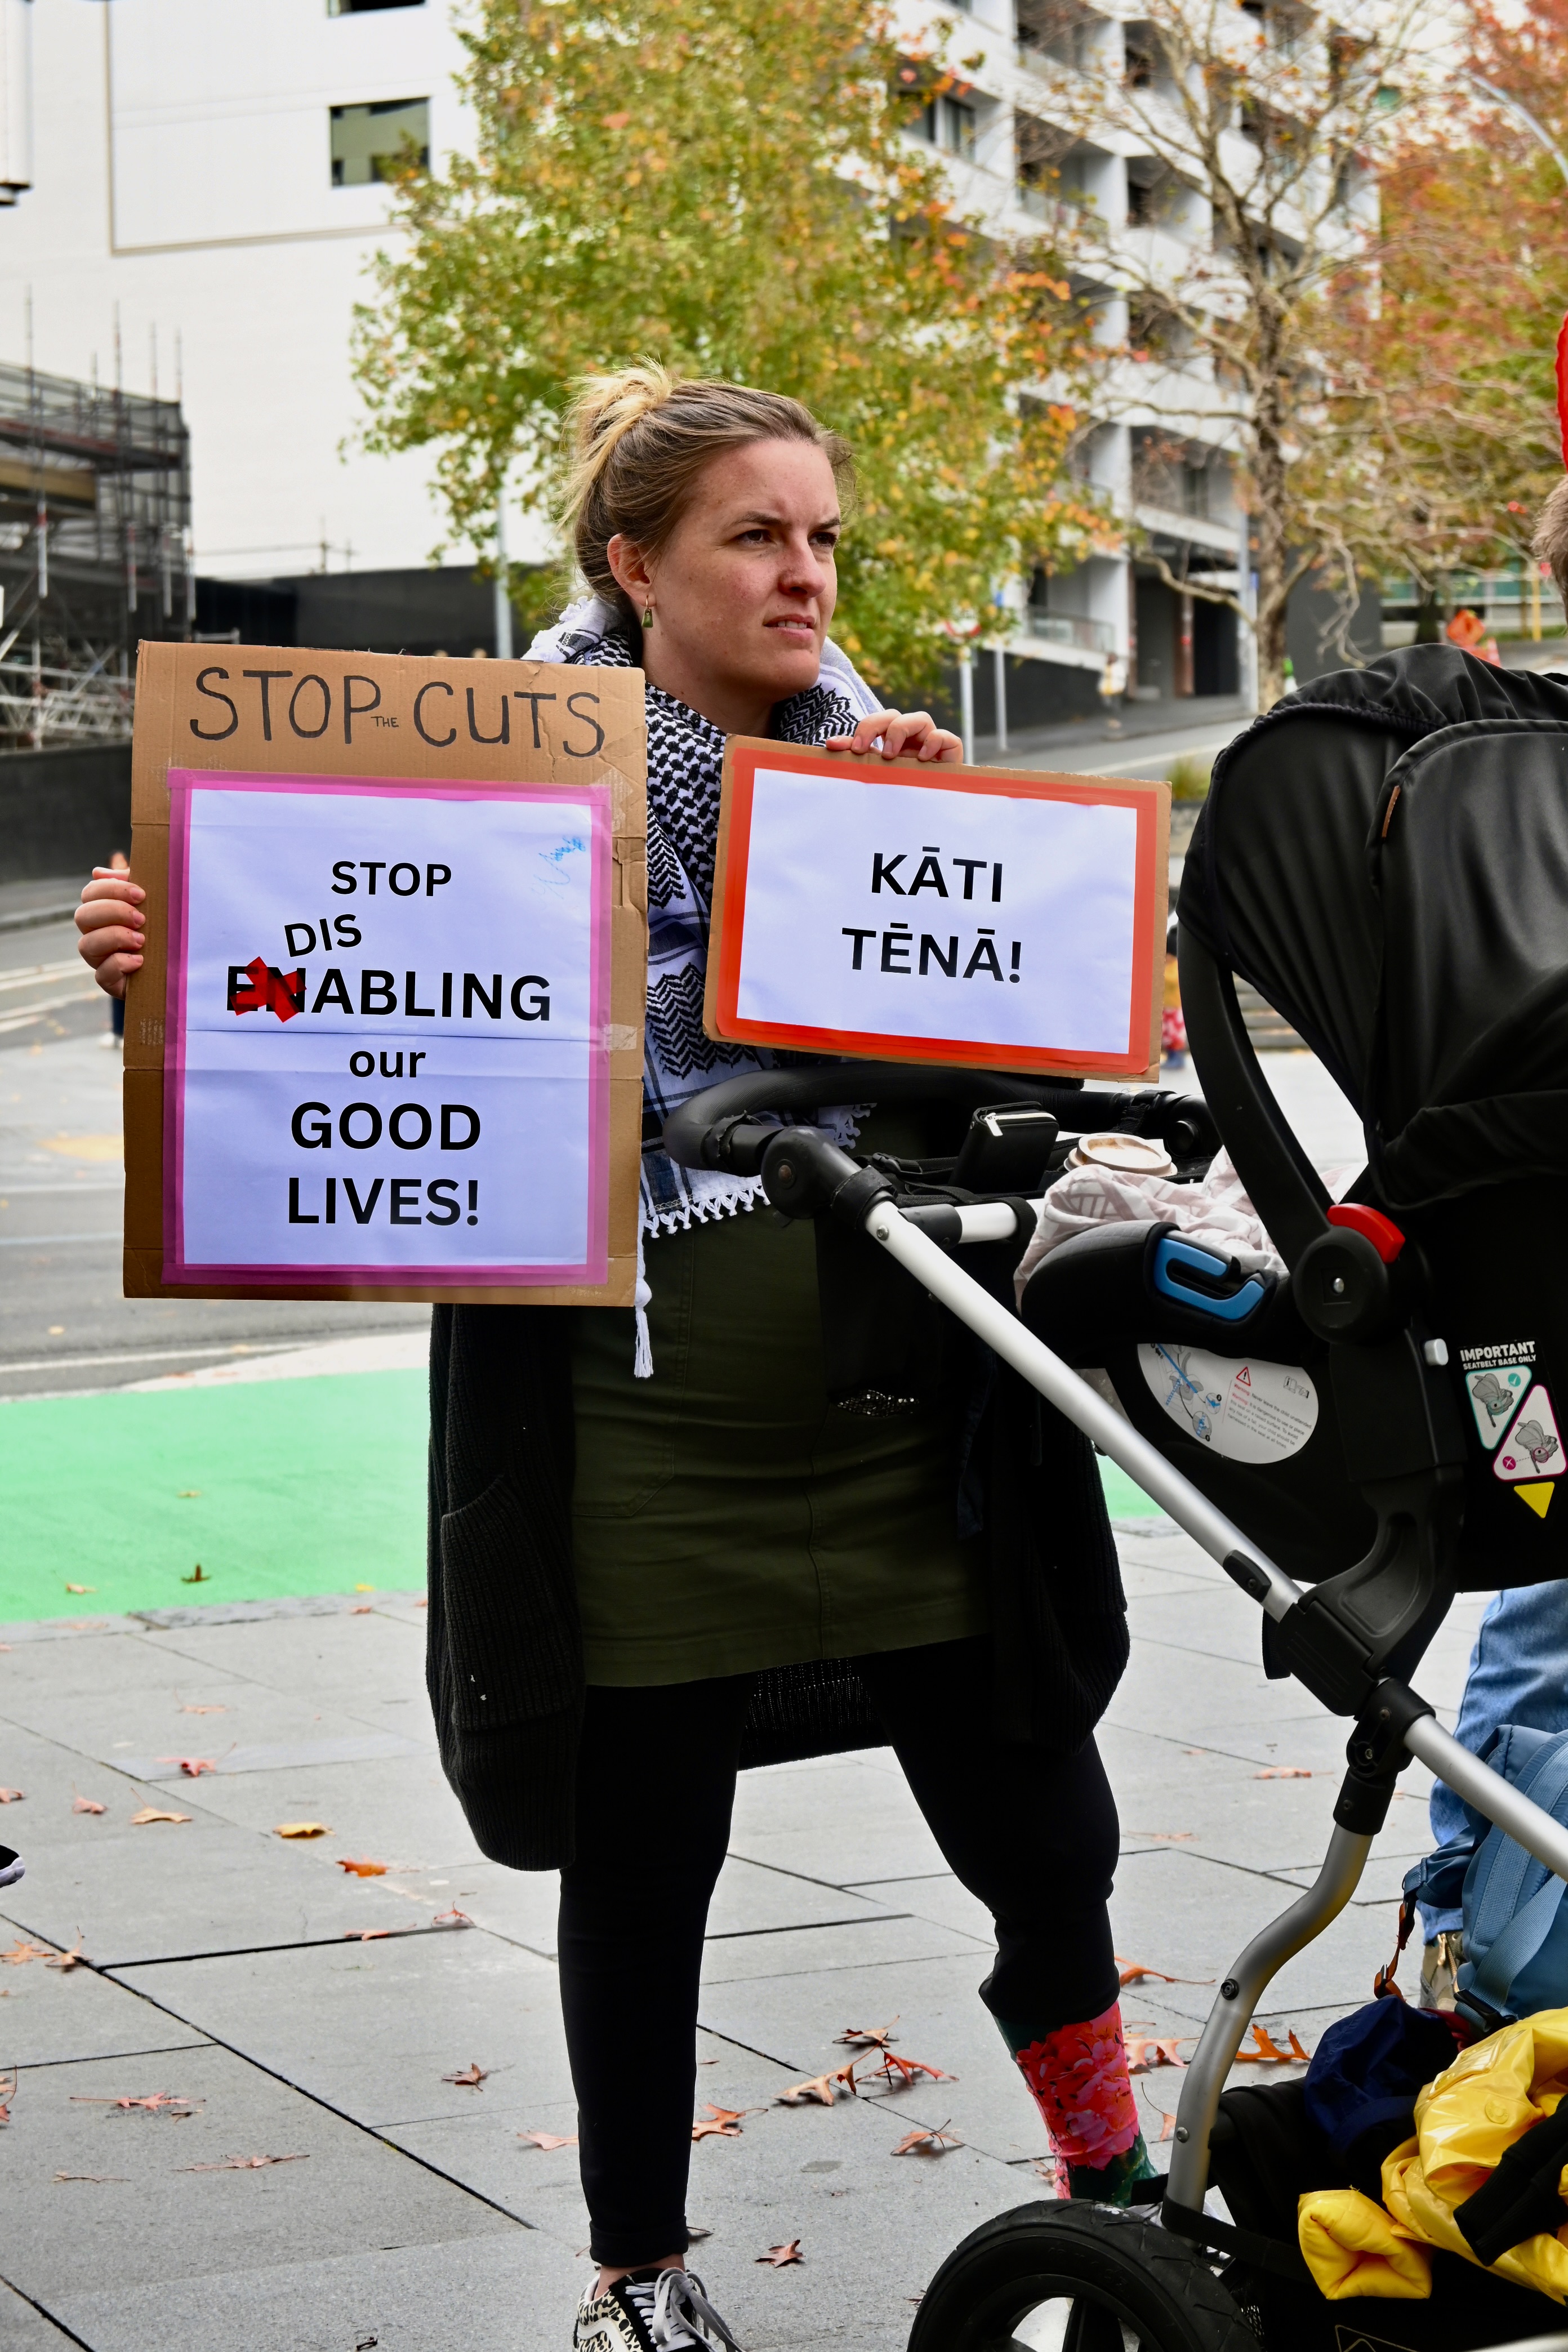 A woman with a prosthetic leg stands behind a baby pram and holds up two signs that read: Stop cuts, stop disabling our good lives! And: Kāti tēnā!